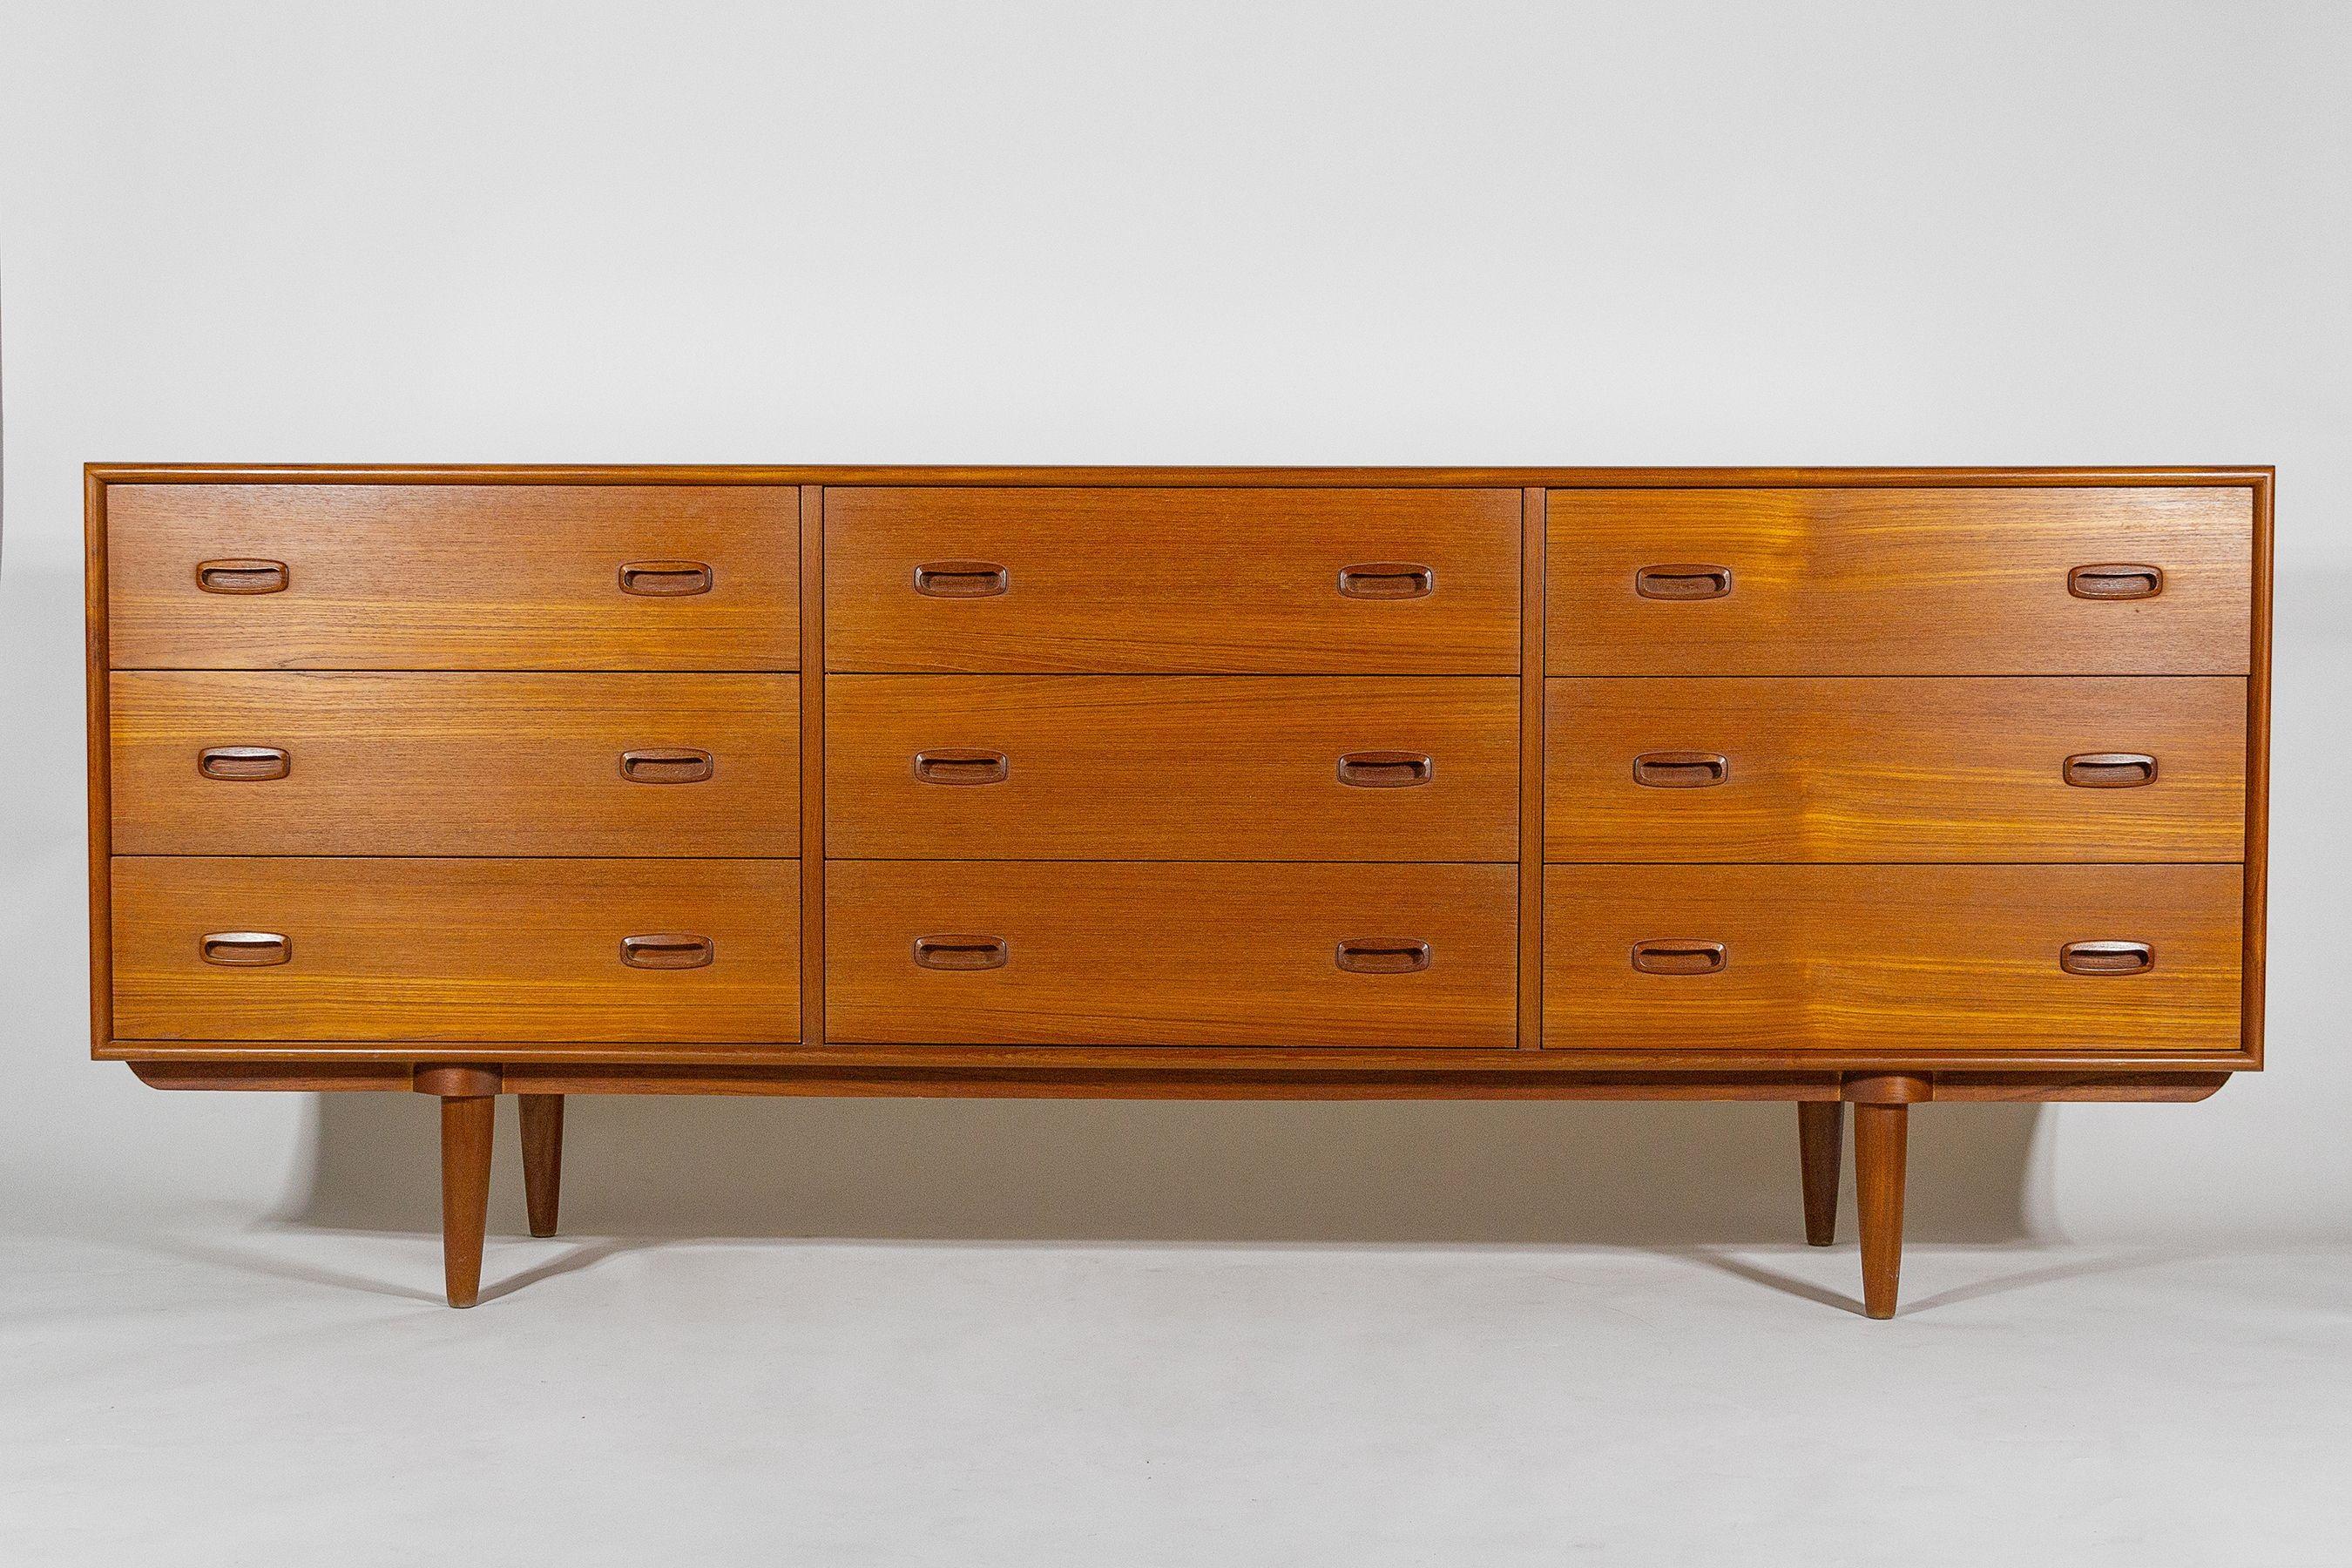 A rare matching pair of Danish Modern 9 Drawer dressers with Oak Interiors Attributed to Borge Mogensen 1960s.
Exceptionally well crafted with oak interiors with butterfly joinery.